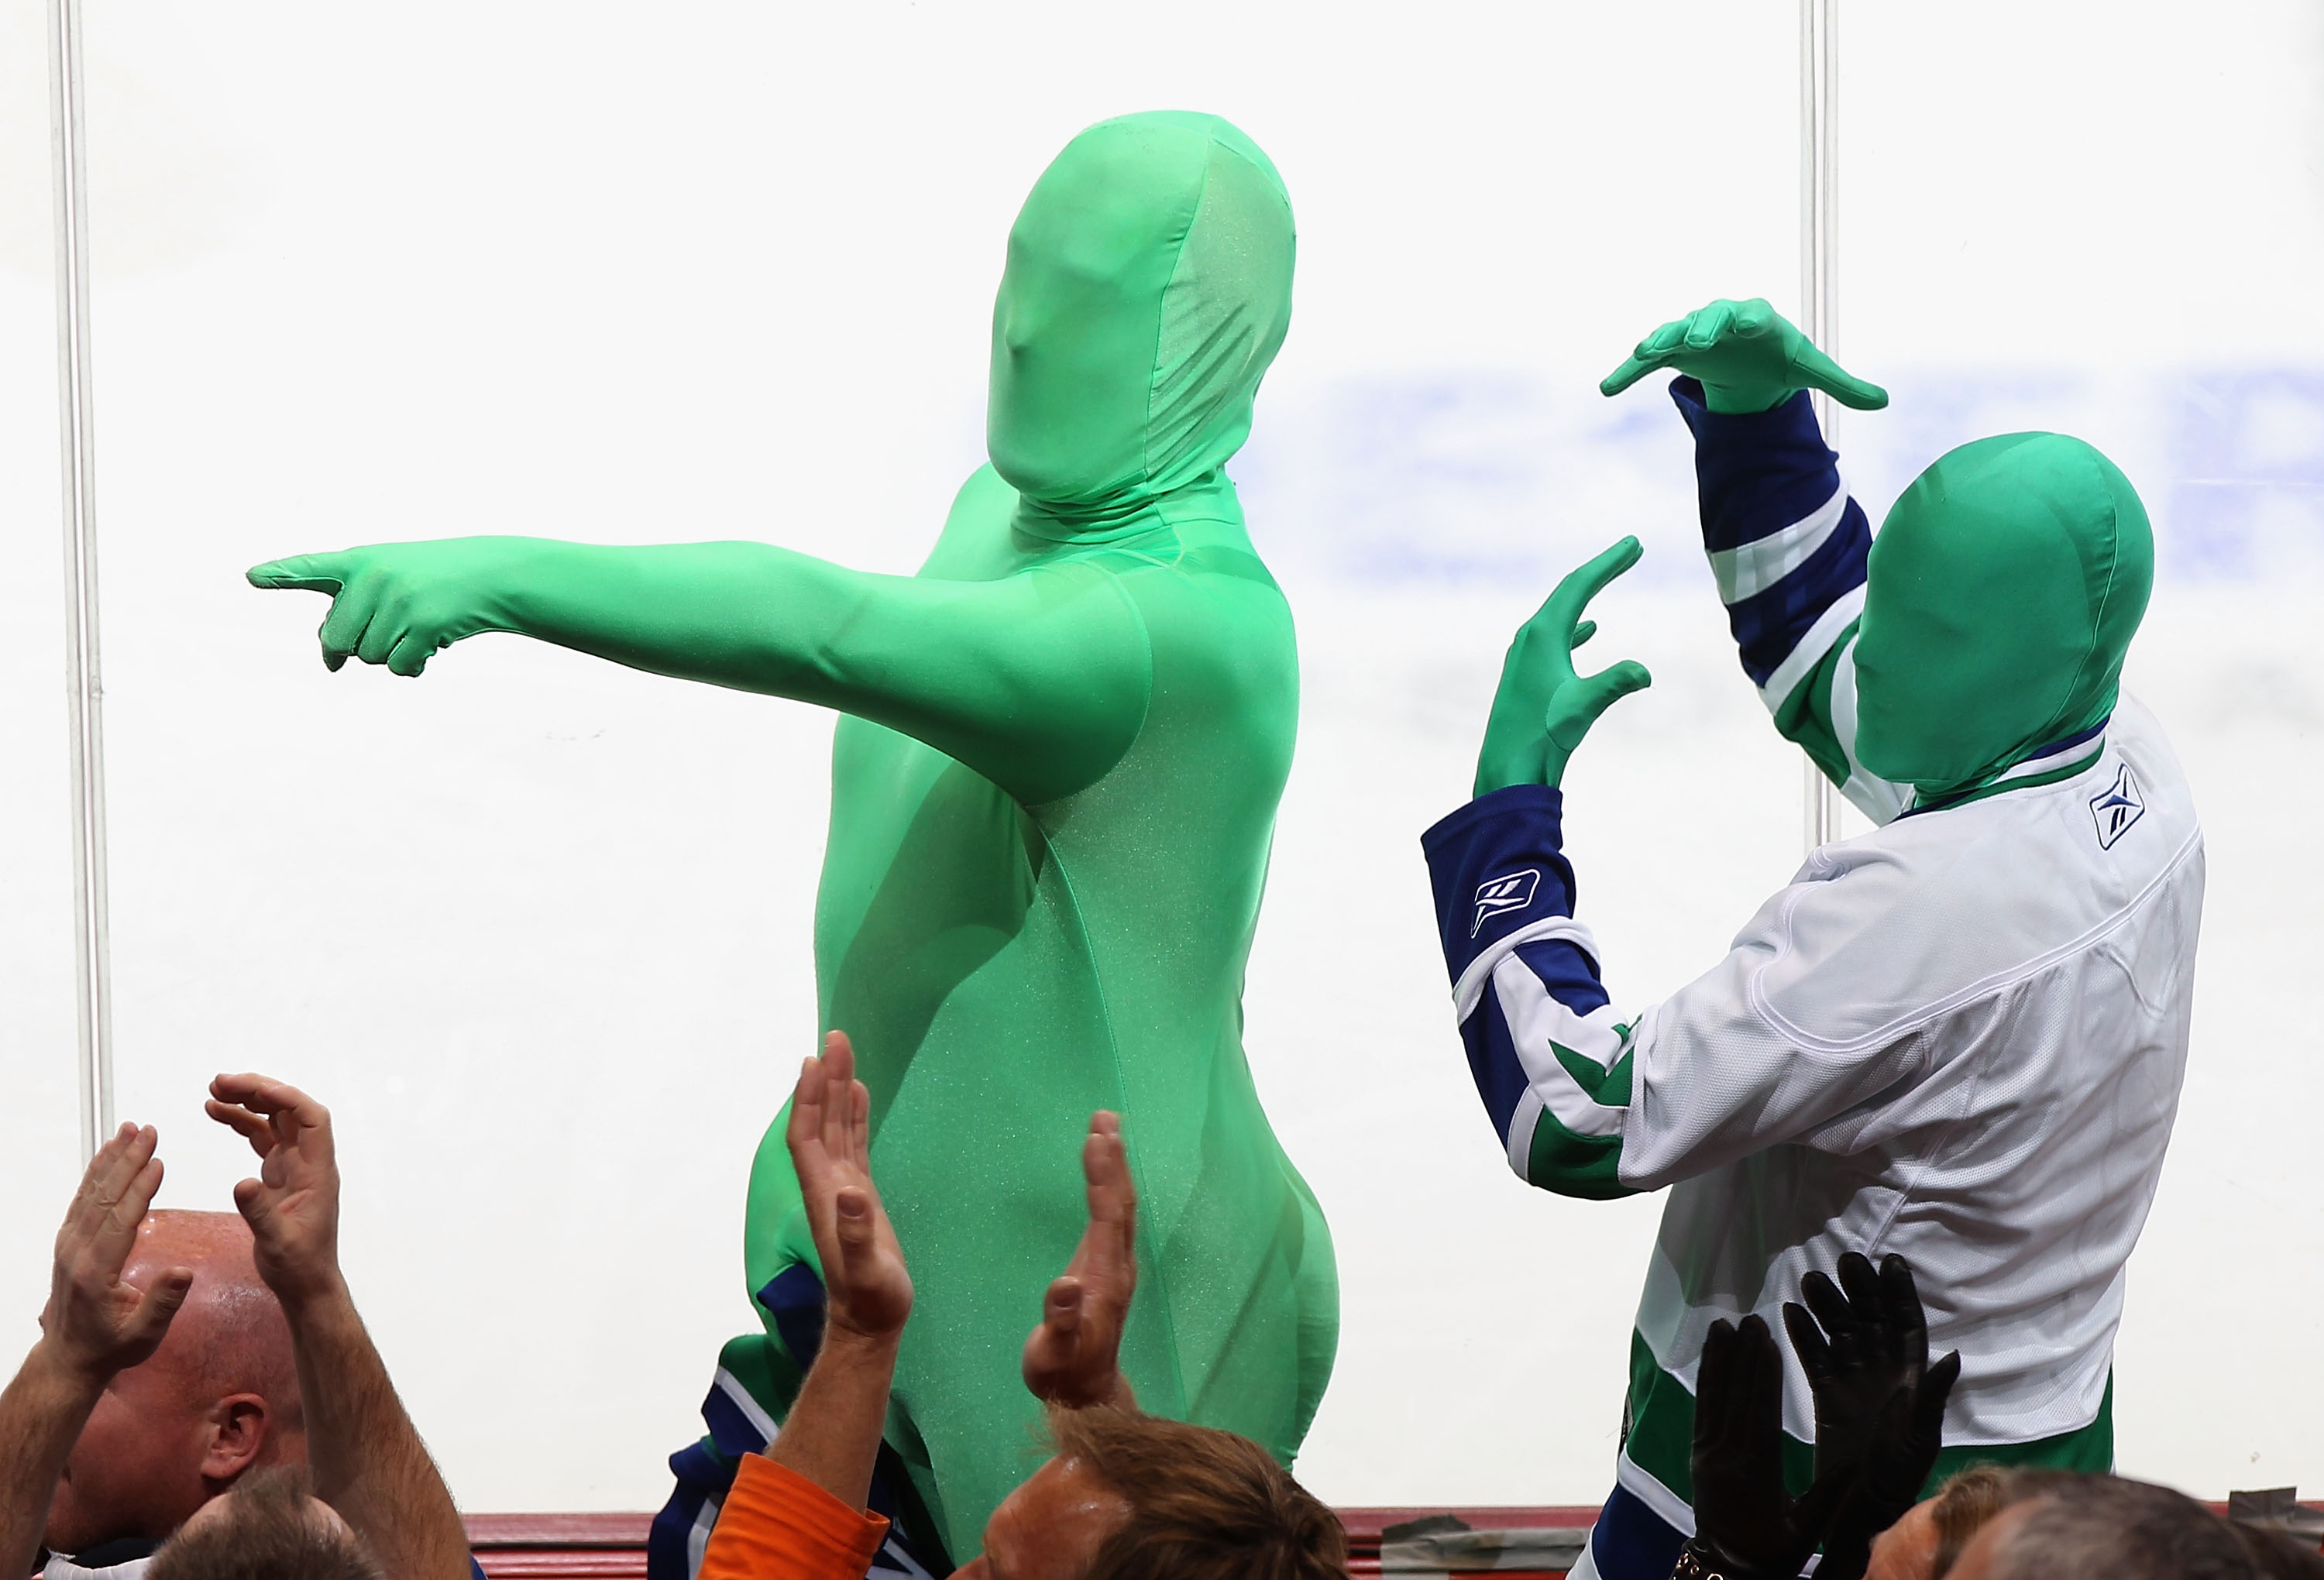 GLENDALE, AZ - FEBRUARY 02:  Fans of the Vancouver Canucks, Force and Sully, perform during the NHL game against the Phoenix Coyotes at Jobing.com Arena on February 2, 2011 in Glendale, Arizona.  The Canucks defeated the Coyotes 6-0. (Photo by Christian P